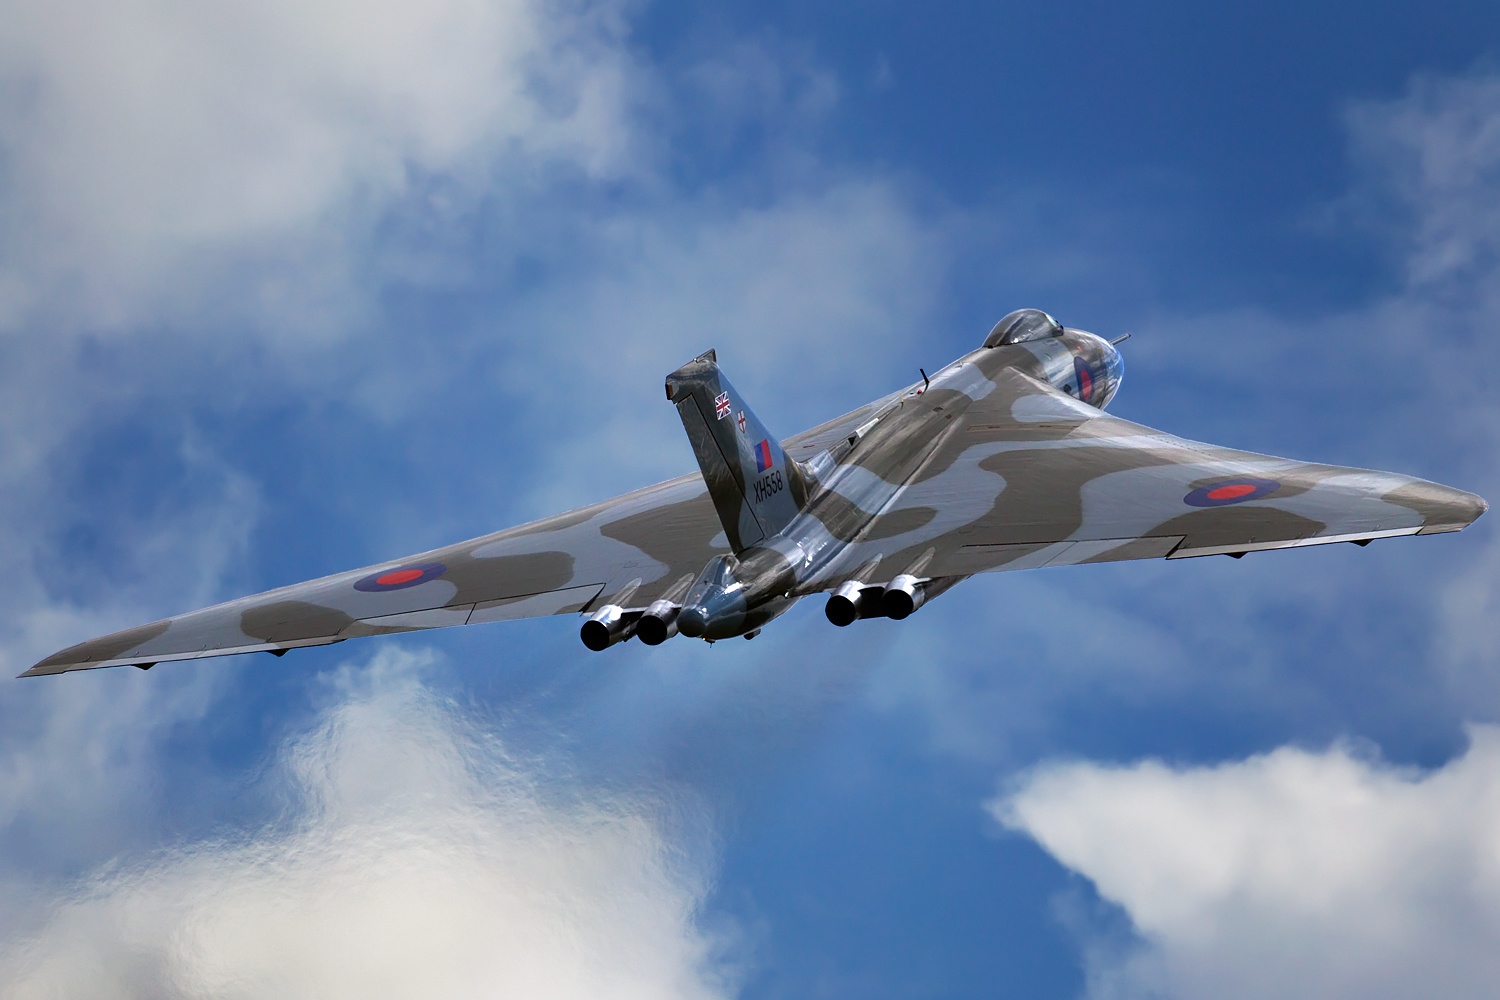 XH558 was famous for the noise it made.